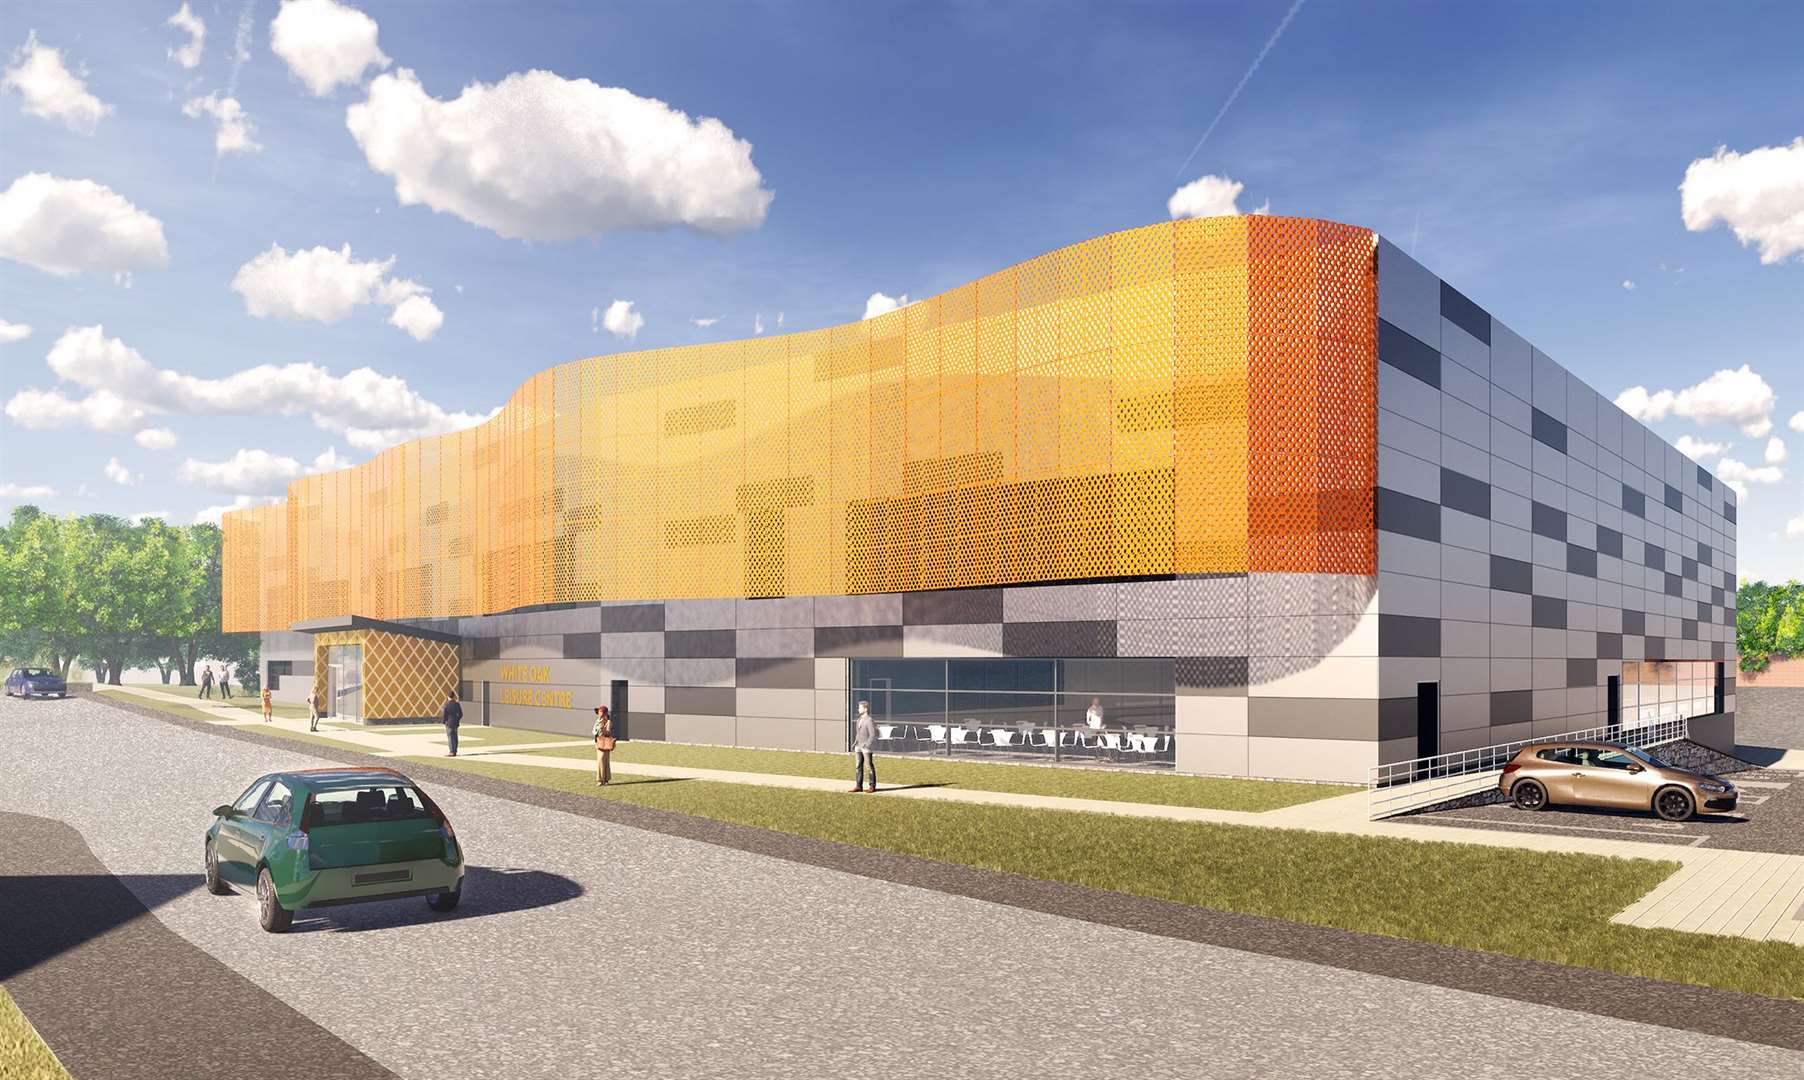 An artist's impression of how the new look leisure centre will look in Hilda May Avenue, Swanley.